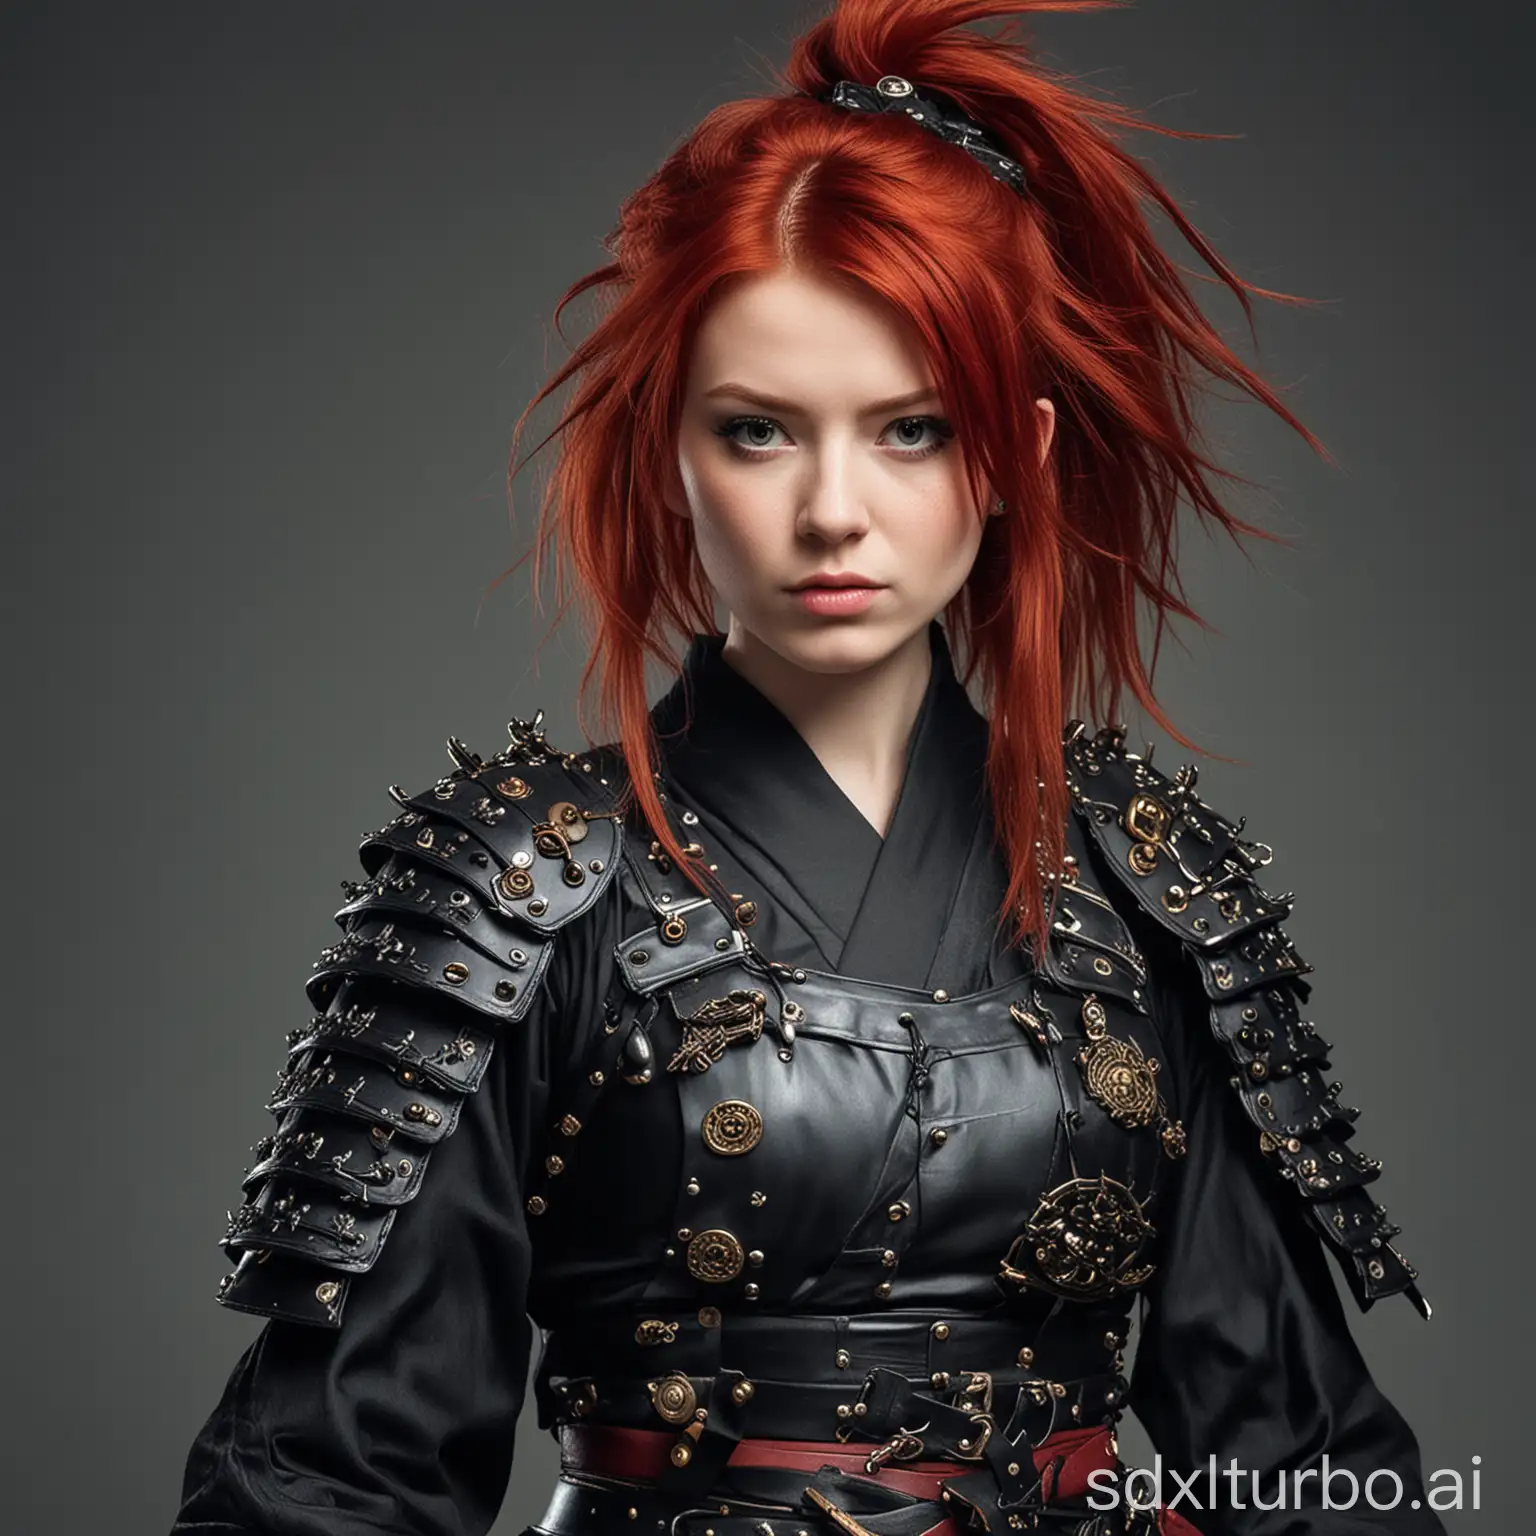 photo of a red-haired girl dressed as punk samurai